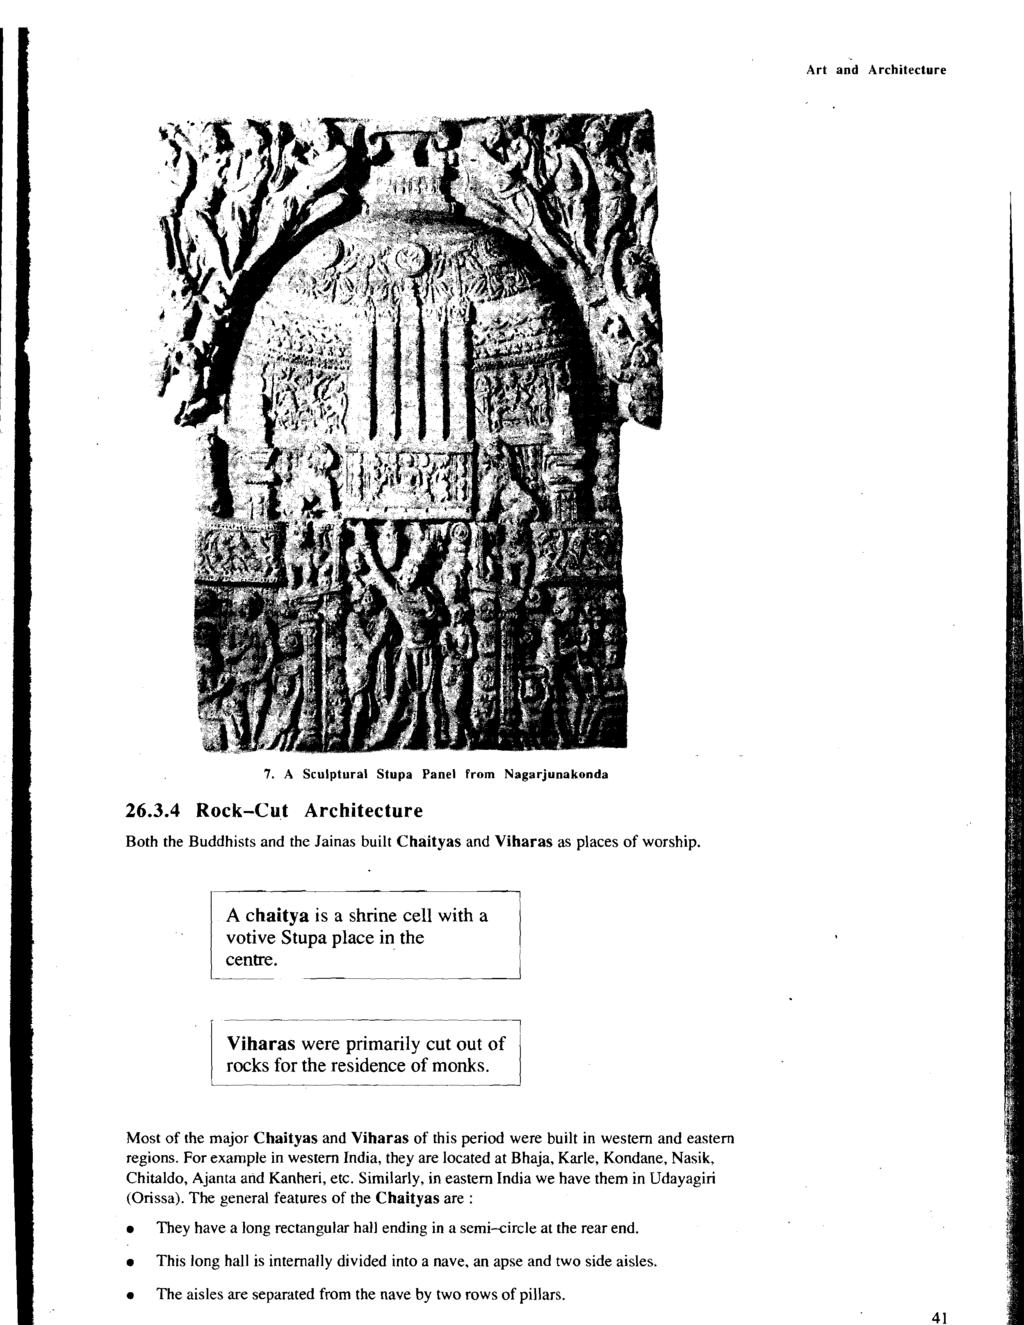 Art and Architecture 7. A Sculptural Stupa Panel from Nagarjunakonda 26.3.4 Rock-Cut Architecture Both the Buddhists and the Jainas built Chaityas and Viharas as places of worship.